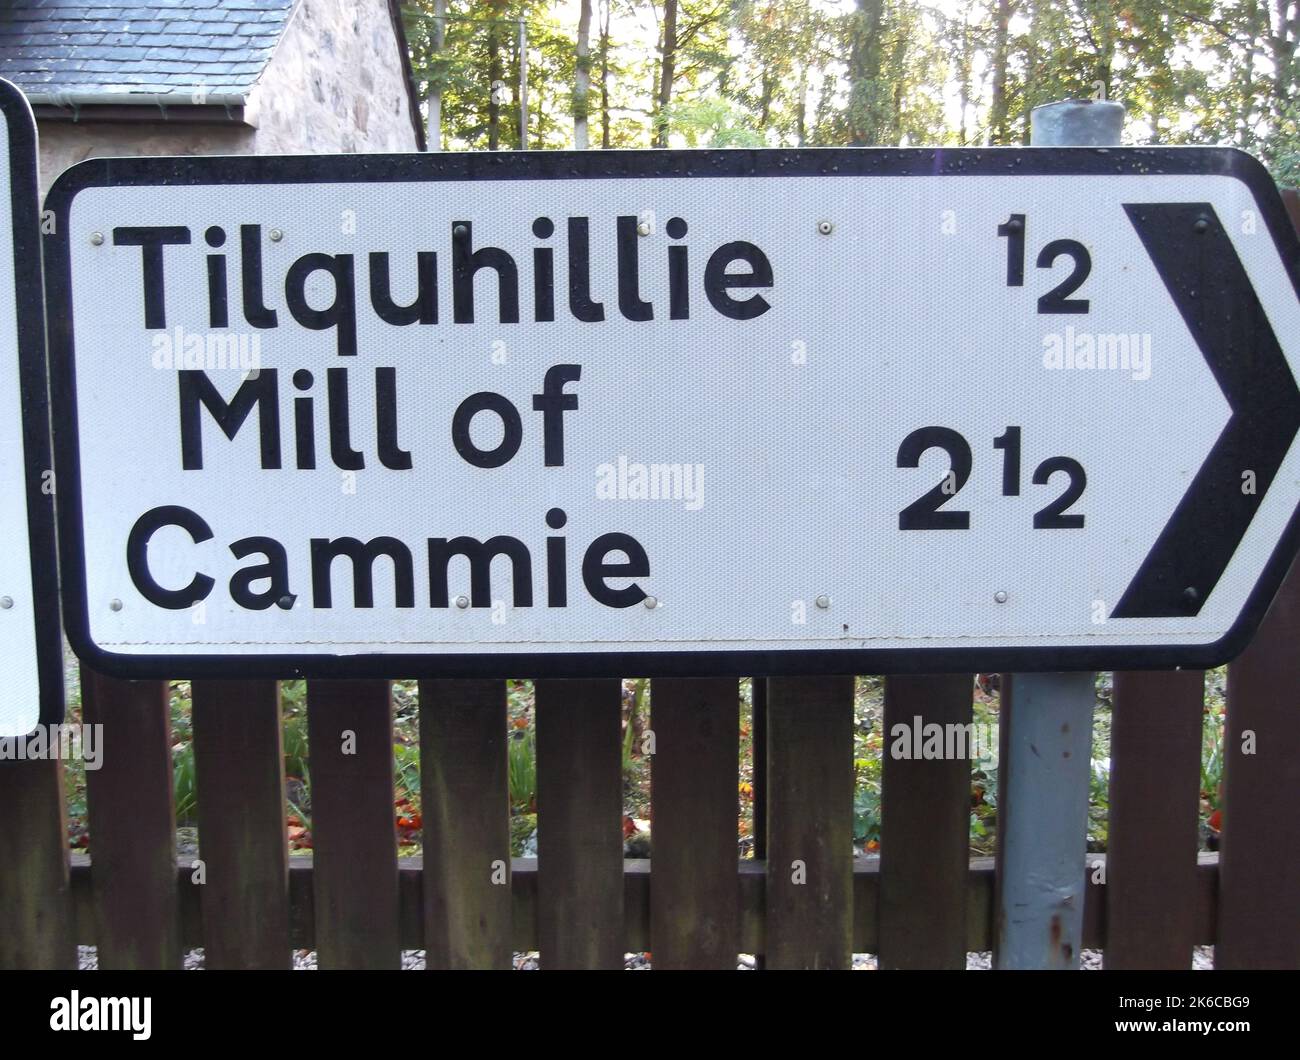 Road sign for Tilquhillie and Mill of Cammie, Banchory, Scotland, 10-10-22 Stock Photo